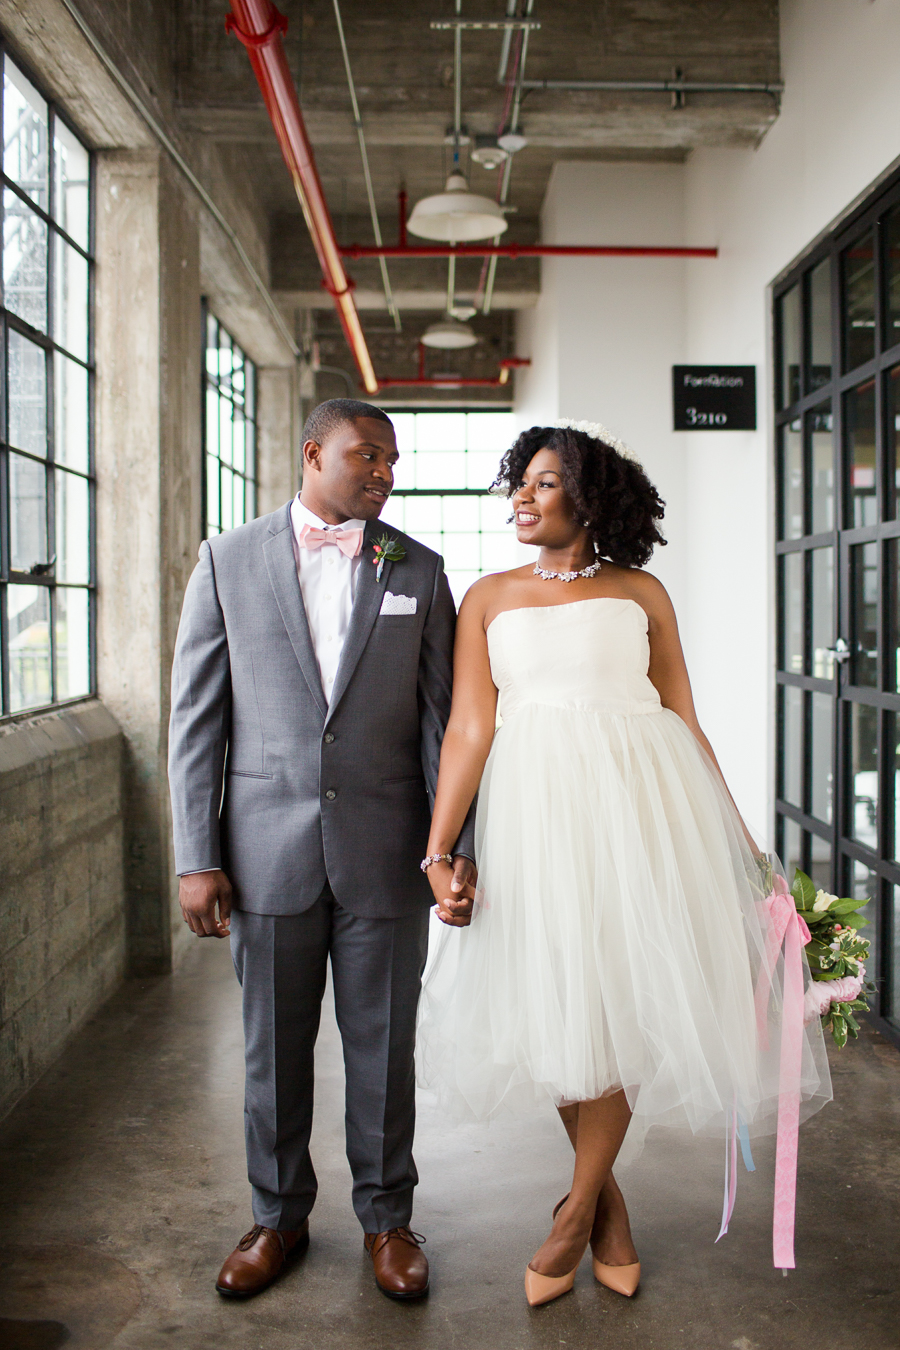 Houston Tuesdays Together (Rising Tide Society) Pantone Colors Styled Shoot, African American Bride & Groom, Colorful Bouquet